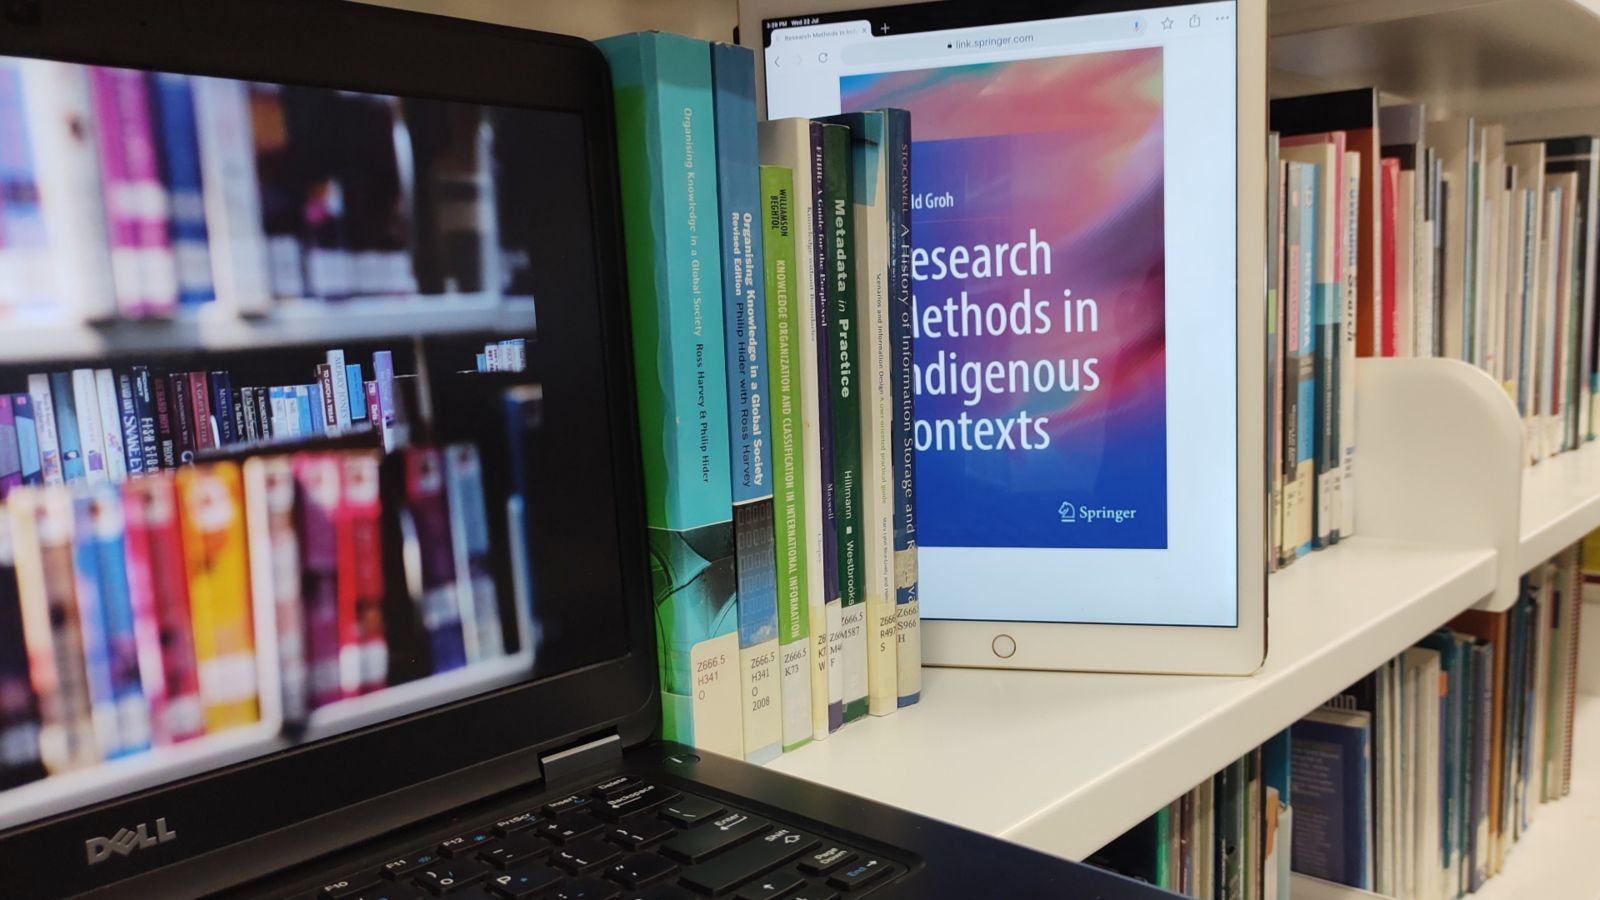 Multicoloured spines of selection of print books on a library shelf with a black laptop displaying eBooks, and a white tablet, displaying the front cover of an eBook, emerging from between the print books.